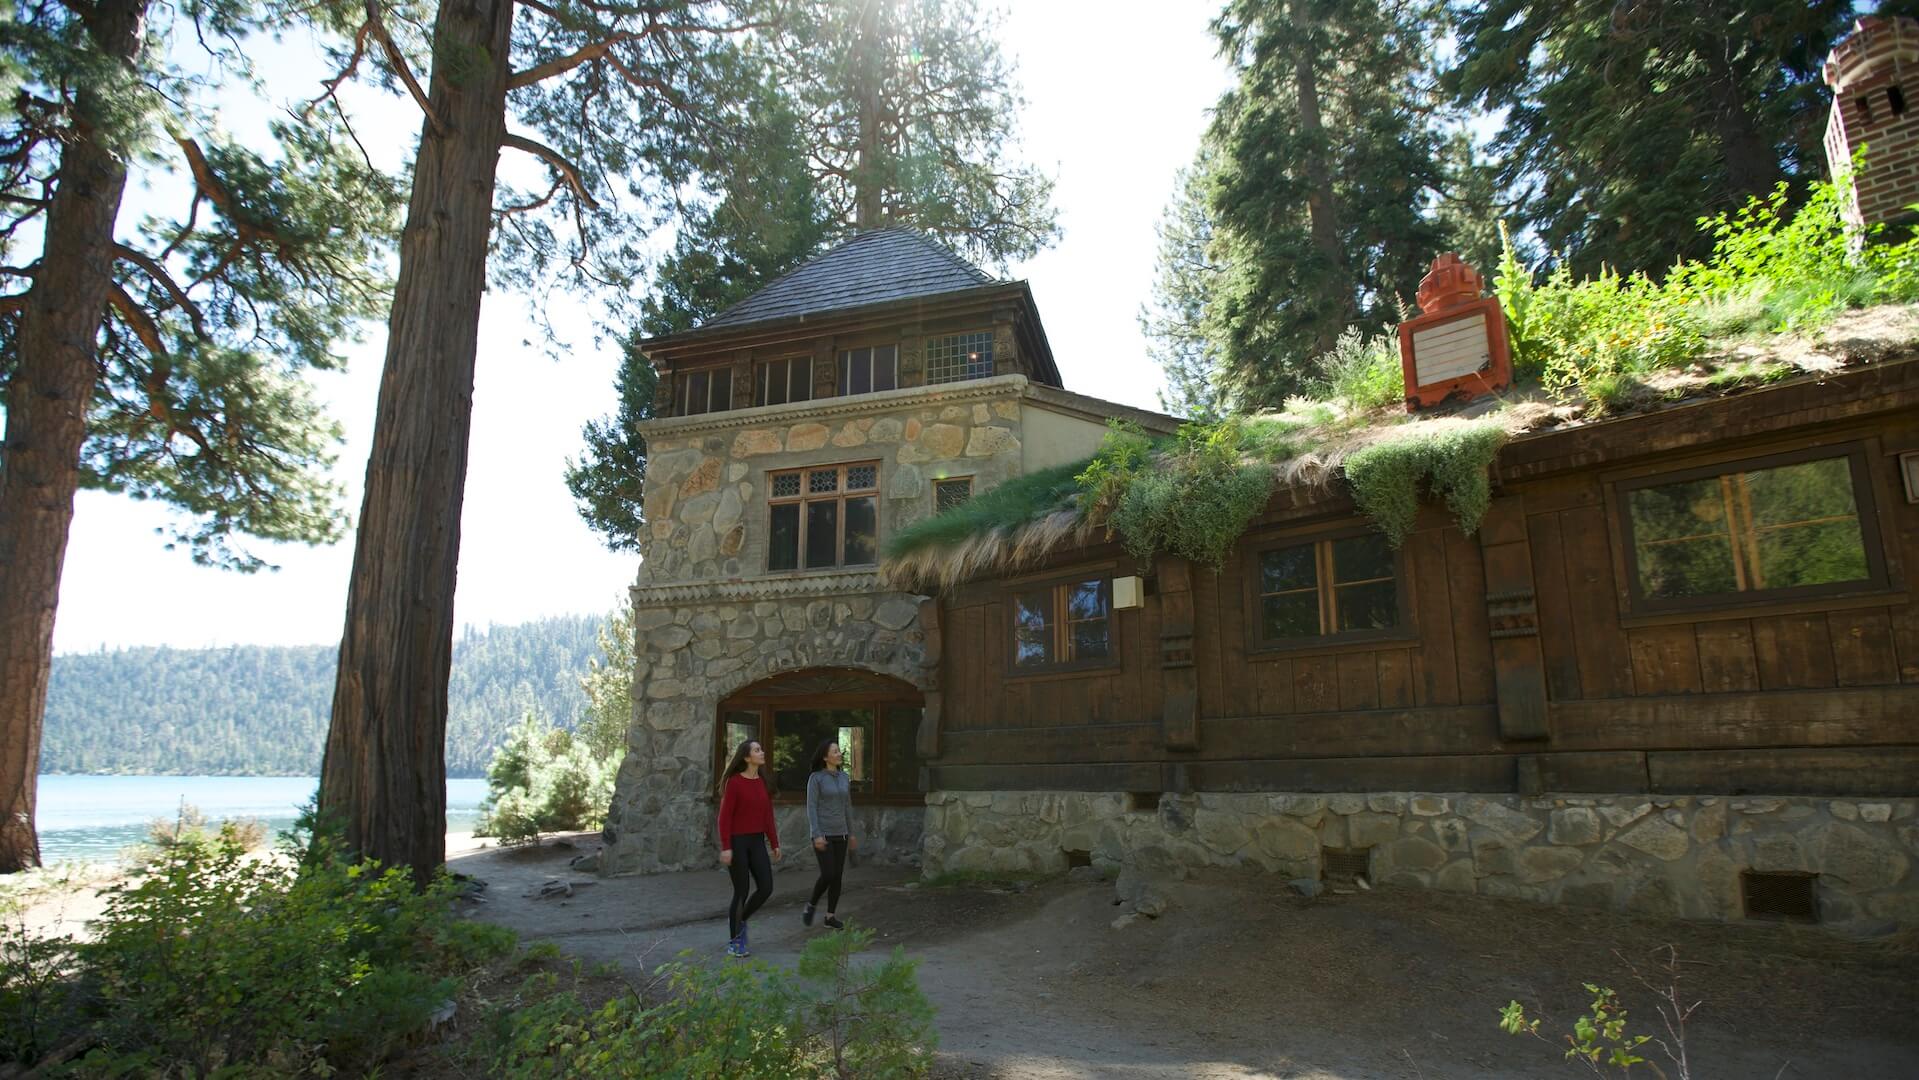 Friends exploring Vikingsholm Castle in Emerald Bay State Park - Brand USA / Lake Tahoe Visitors Authority